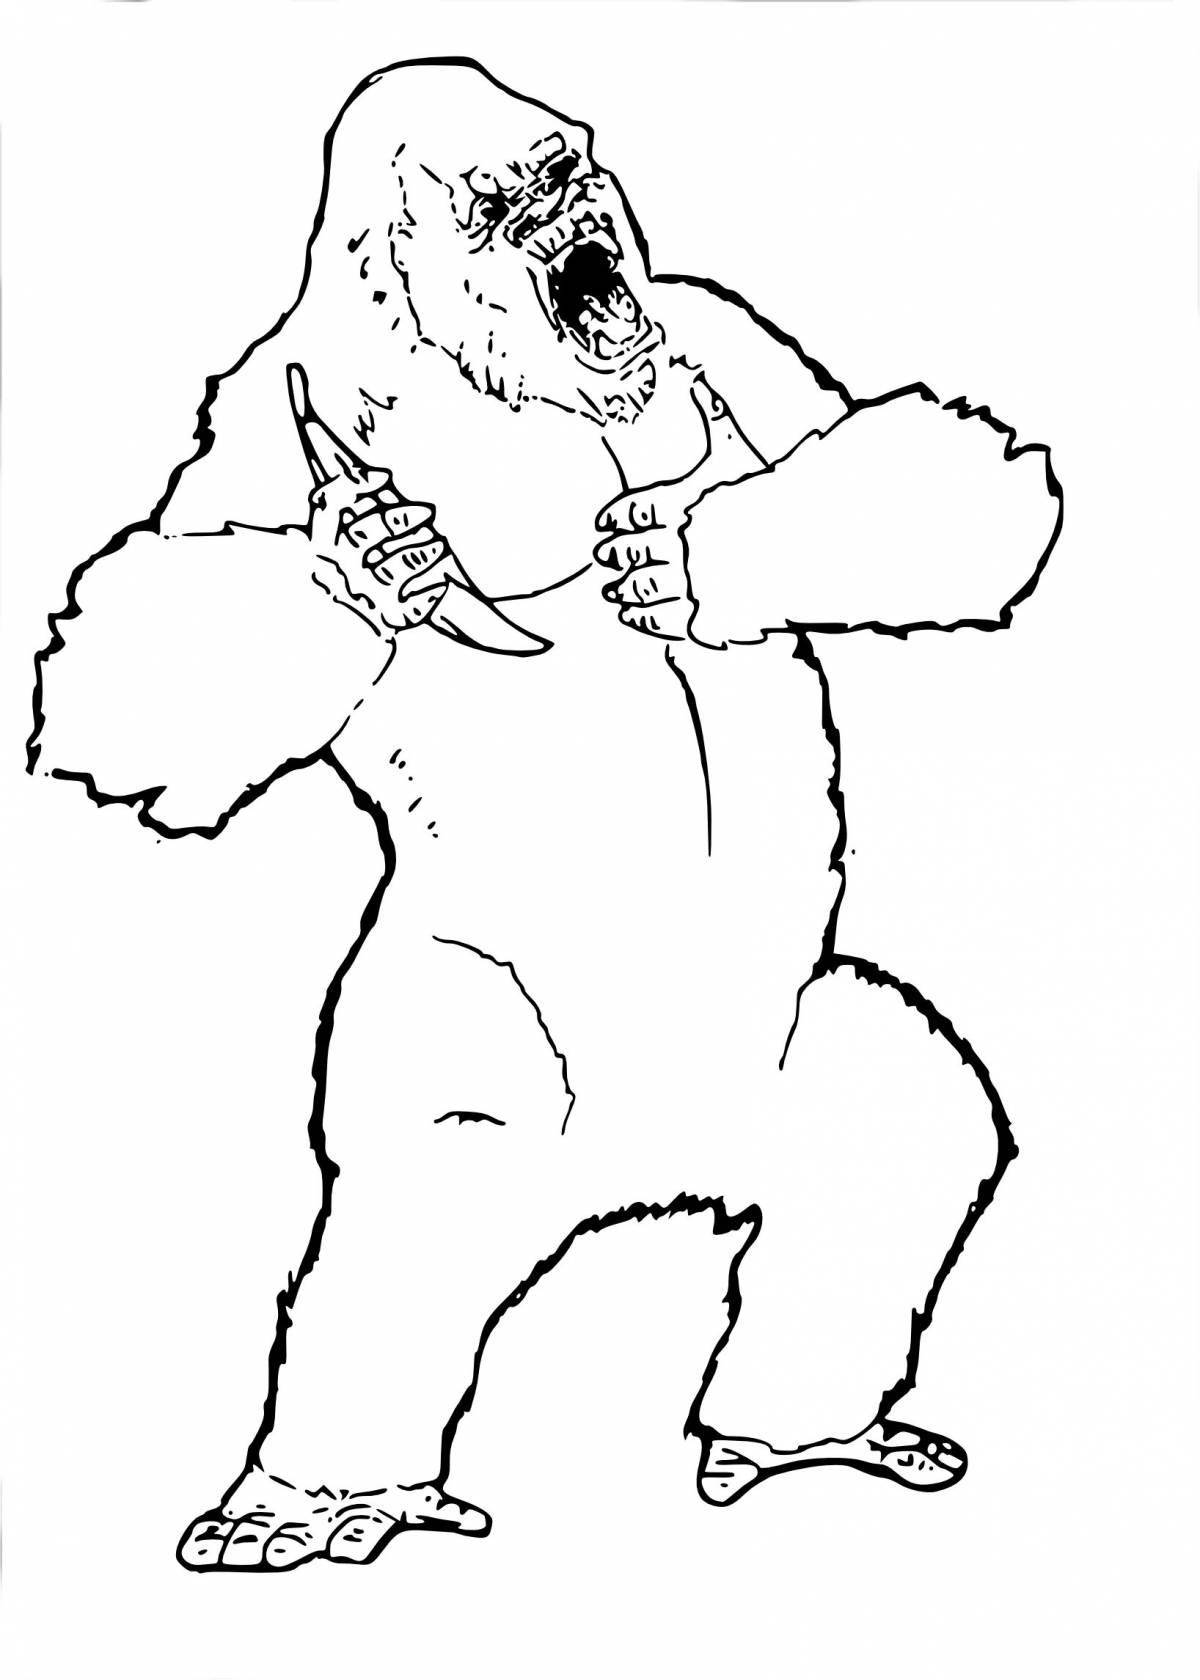 Colorful king kong coloring book for kids